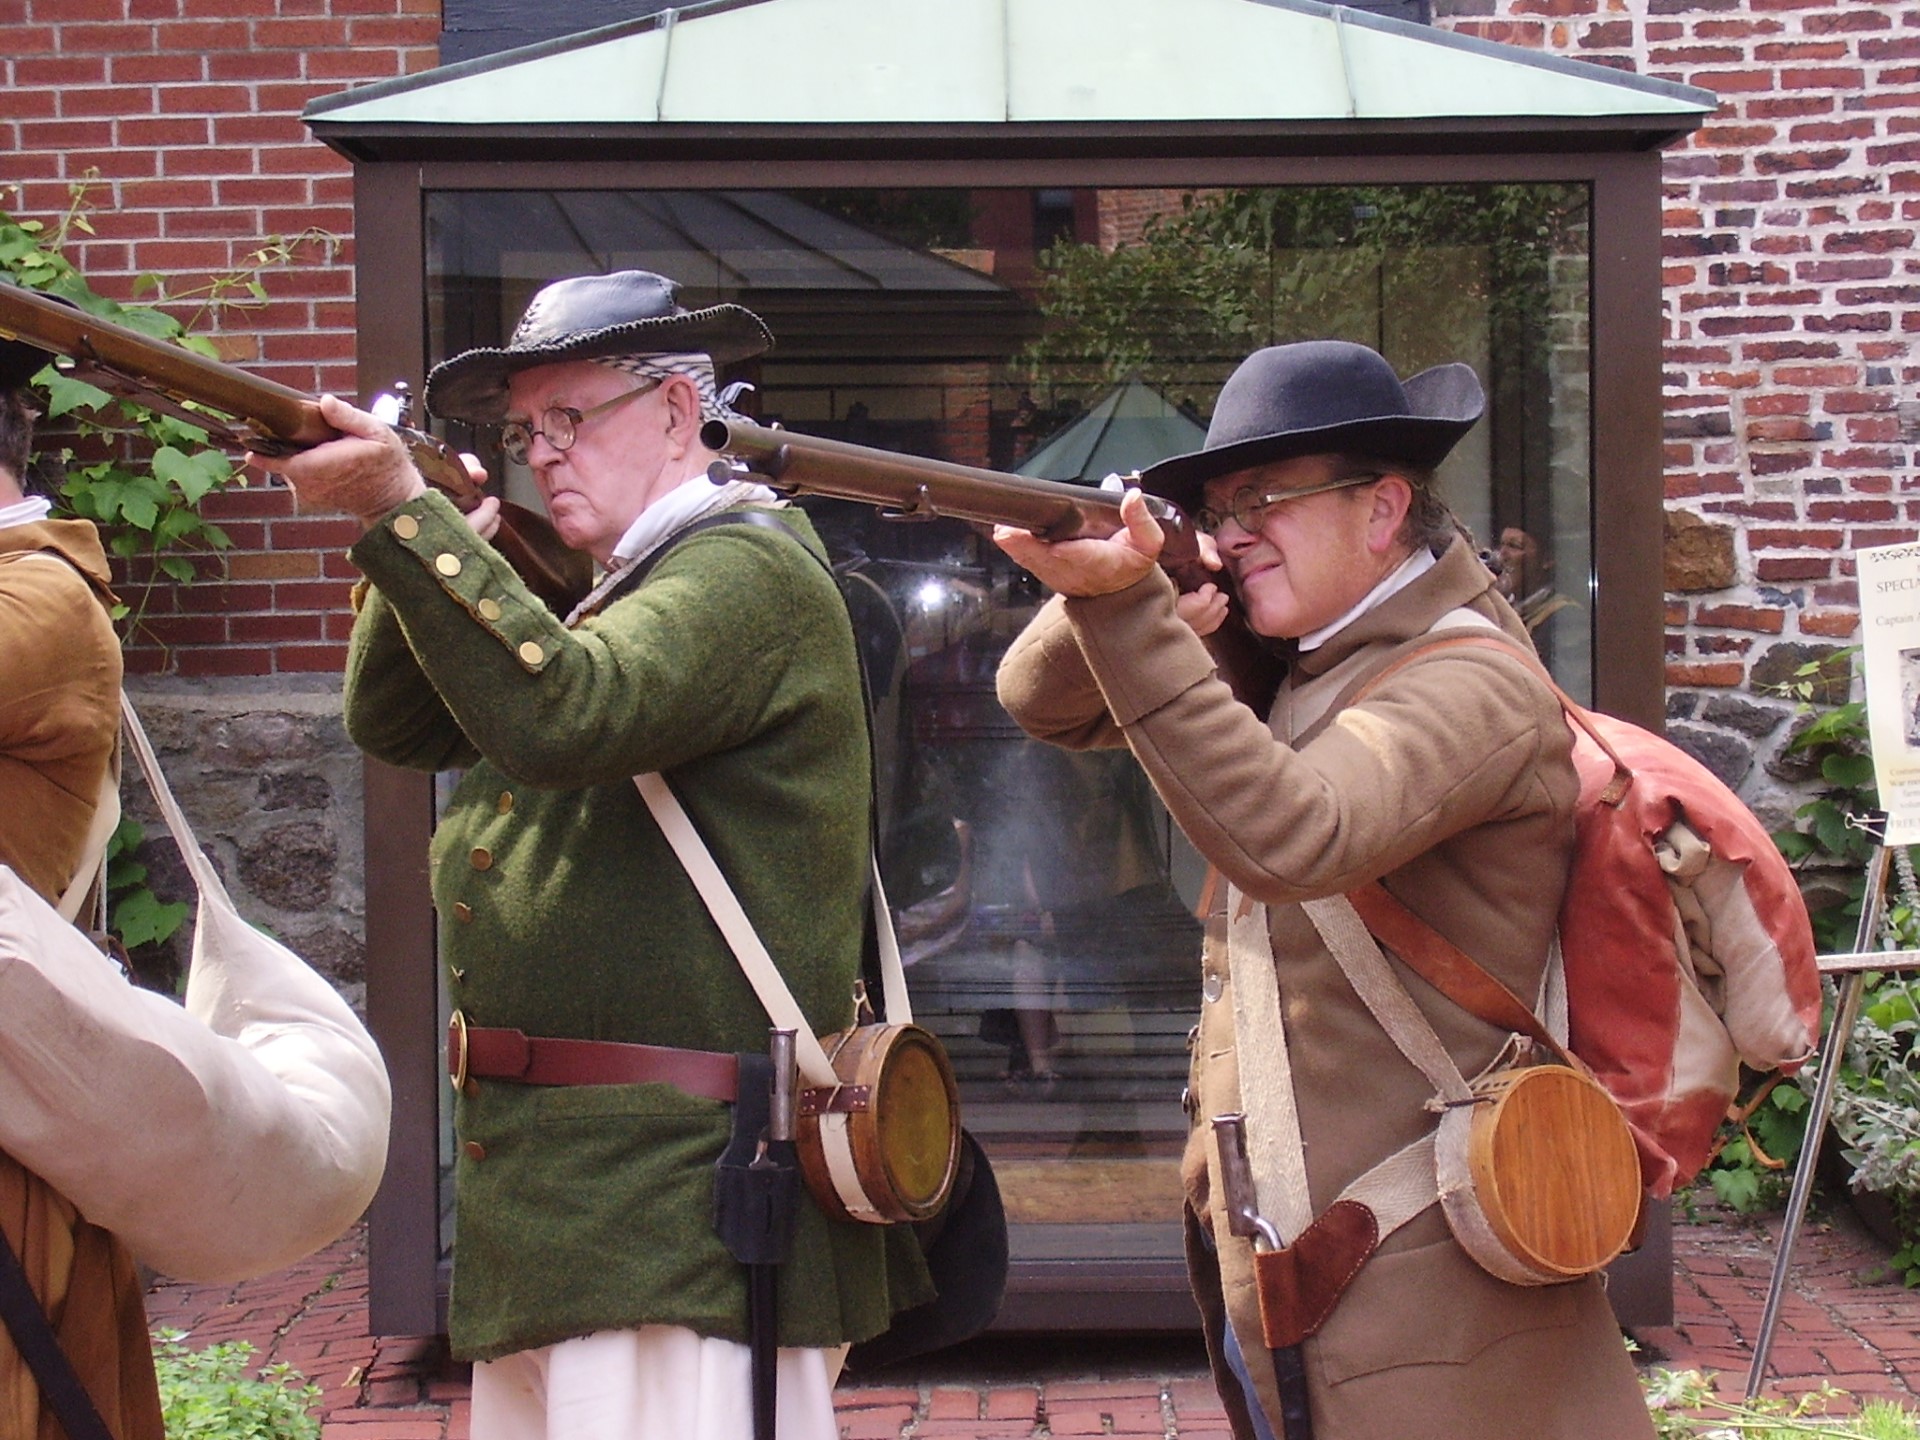 two men in colonial militia clothing pointing muskets at the camera